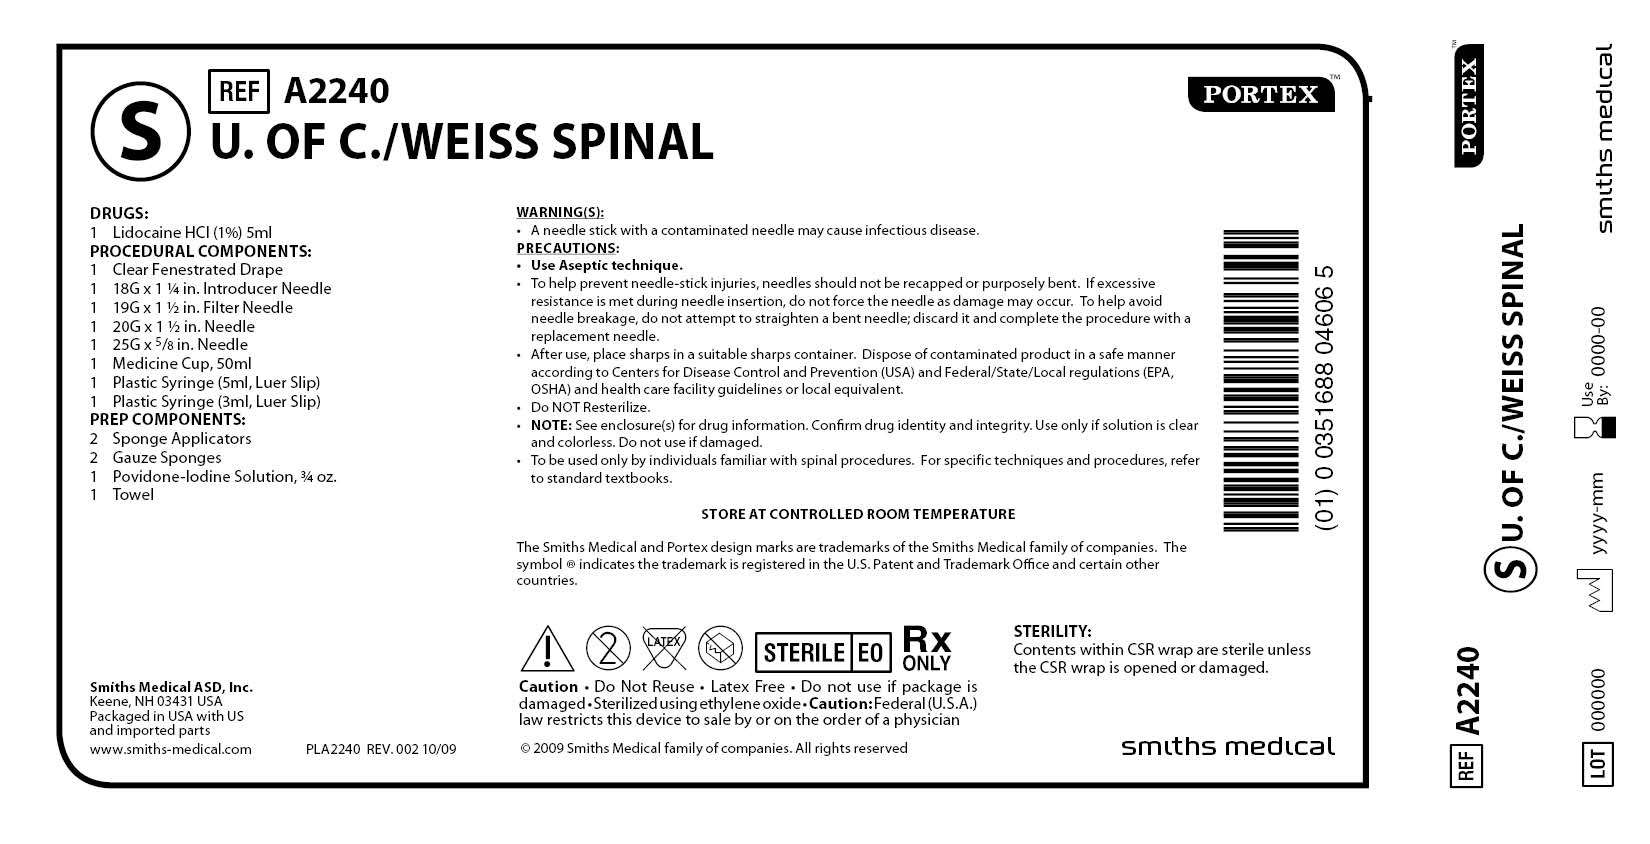 A2240 U. OF C./WEISS SPINAL